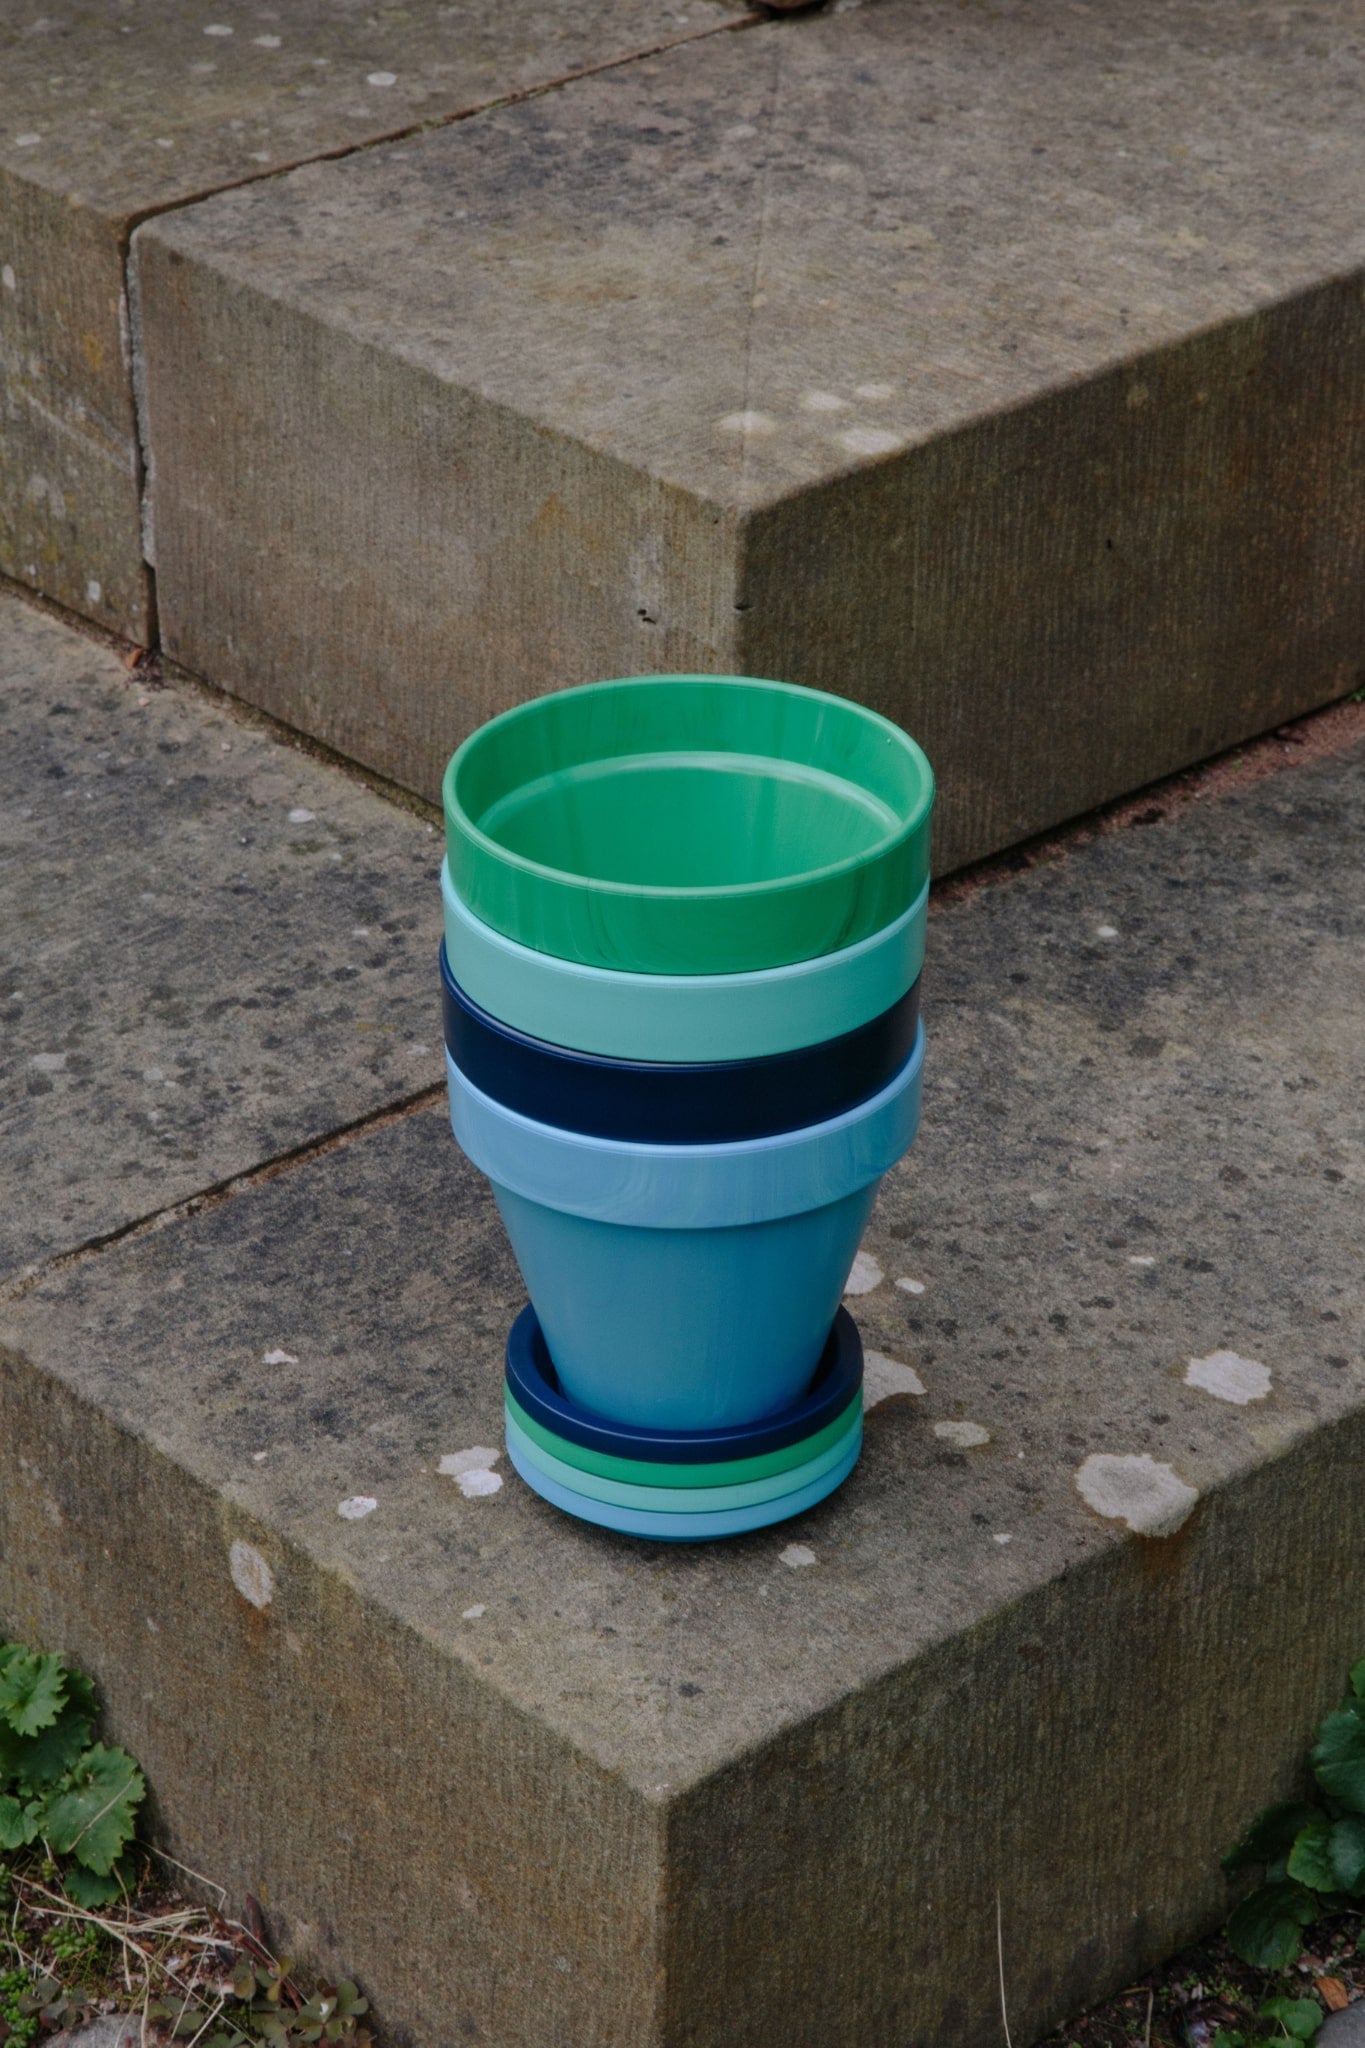 ALT=A stack of green and blue recycled plastic plant pots with saucers. On the edge of a set of stone steps.